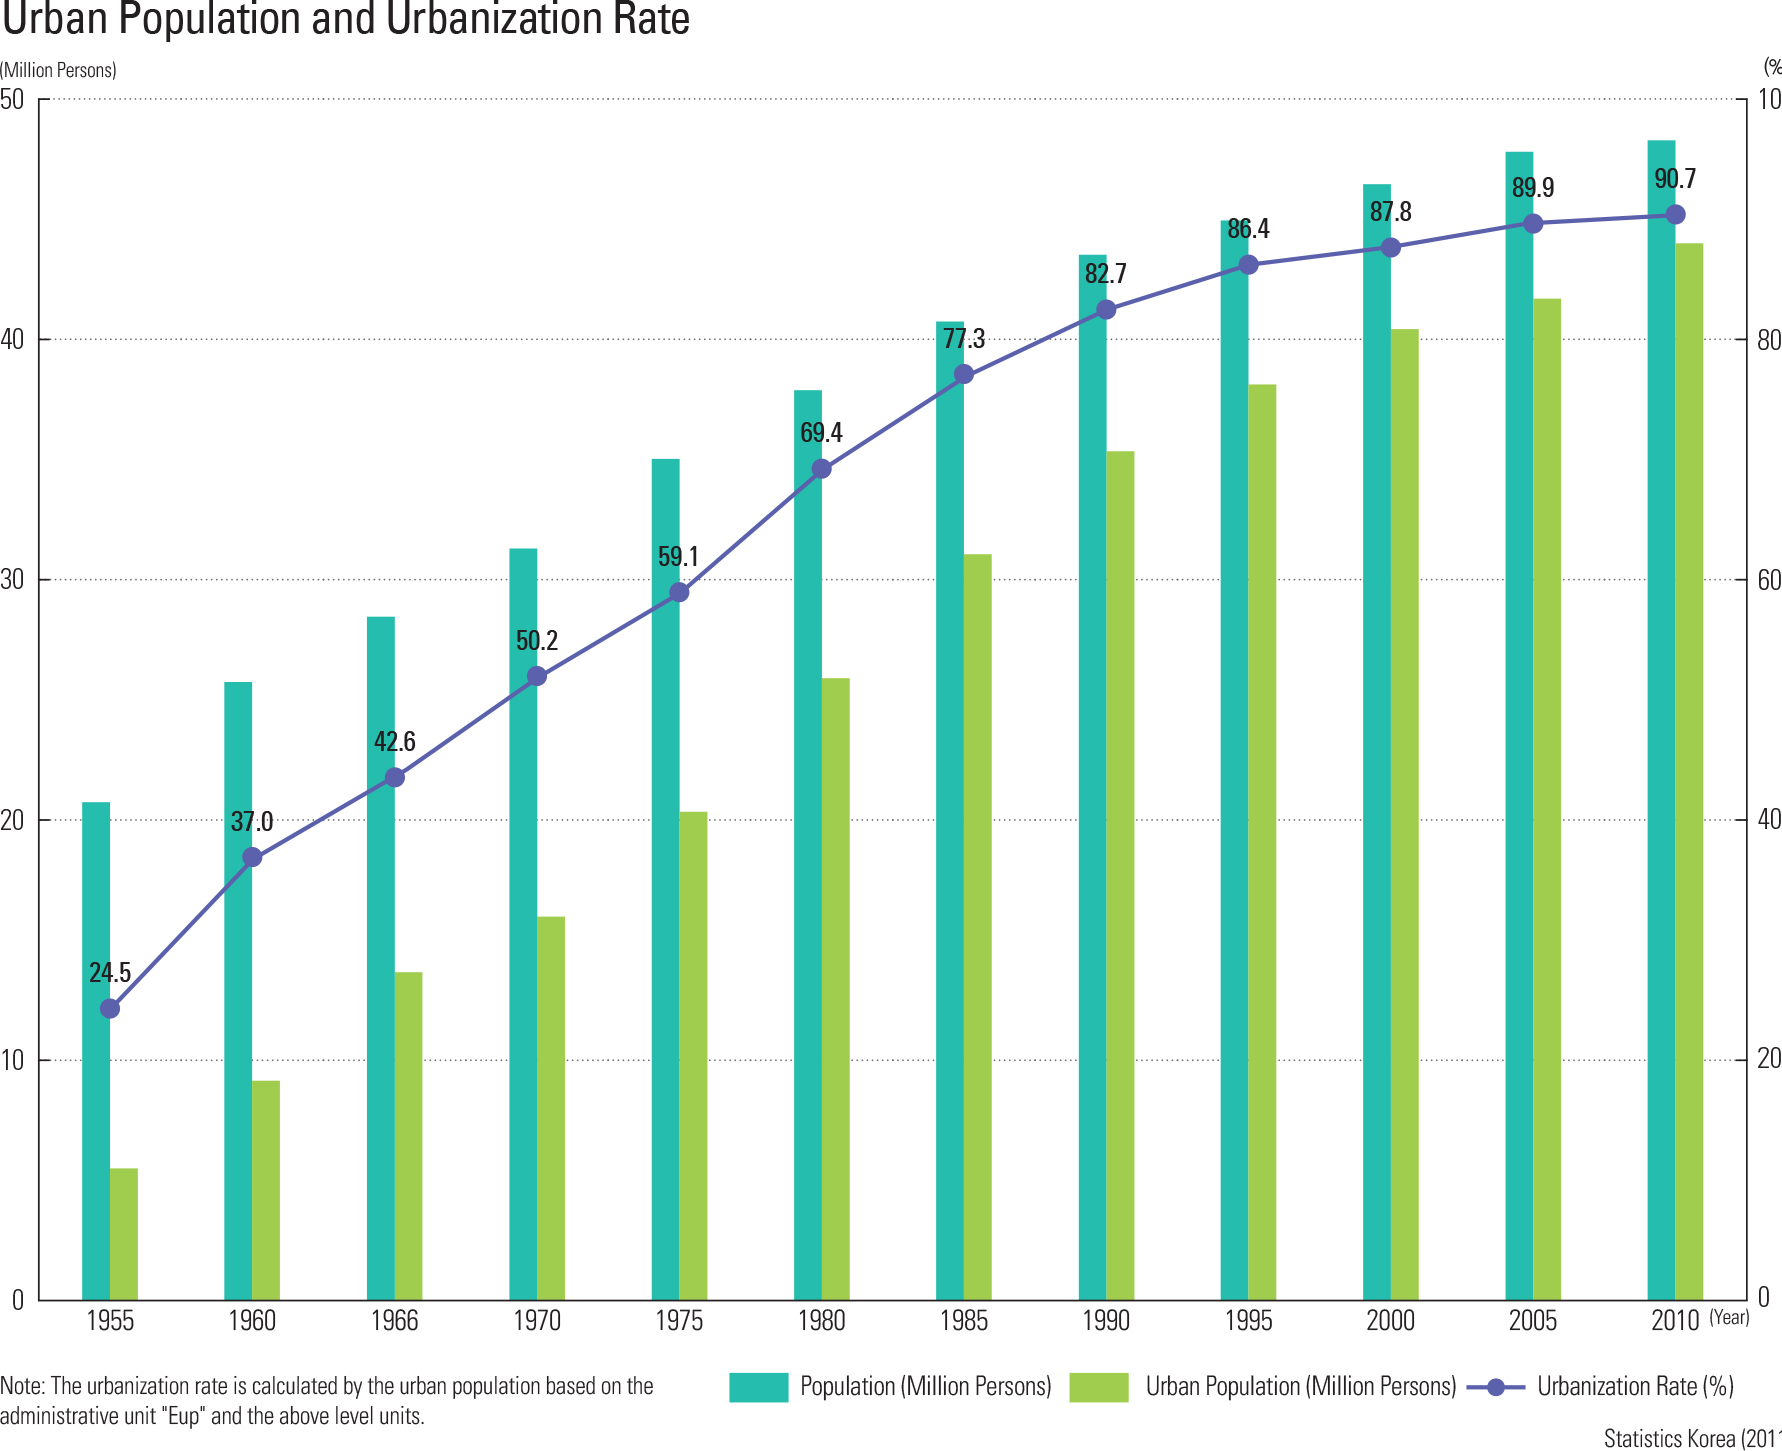  Urban Population and Urbanization Rate<p class="oz_zoom" zimg="http://imagedata.cafe24.com/us_1/us1_72-3_2.jpg"><span style="font-family:Nanum Myeongjo;"><span style="font-size:18px;"><span class="label label-danger">UPDATE DATA</span></span></p>